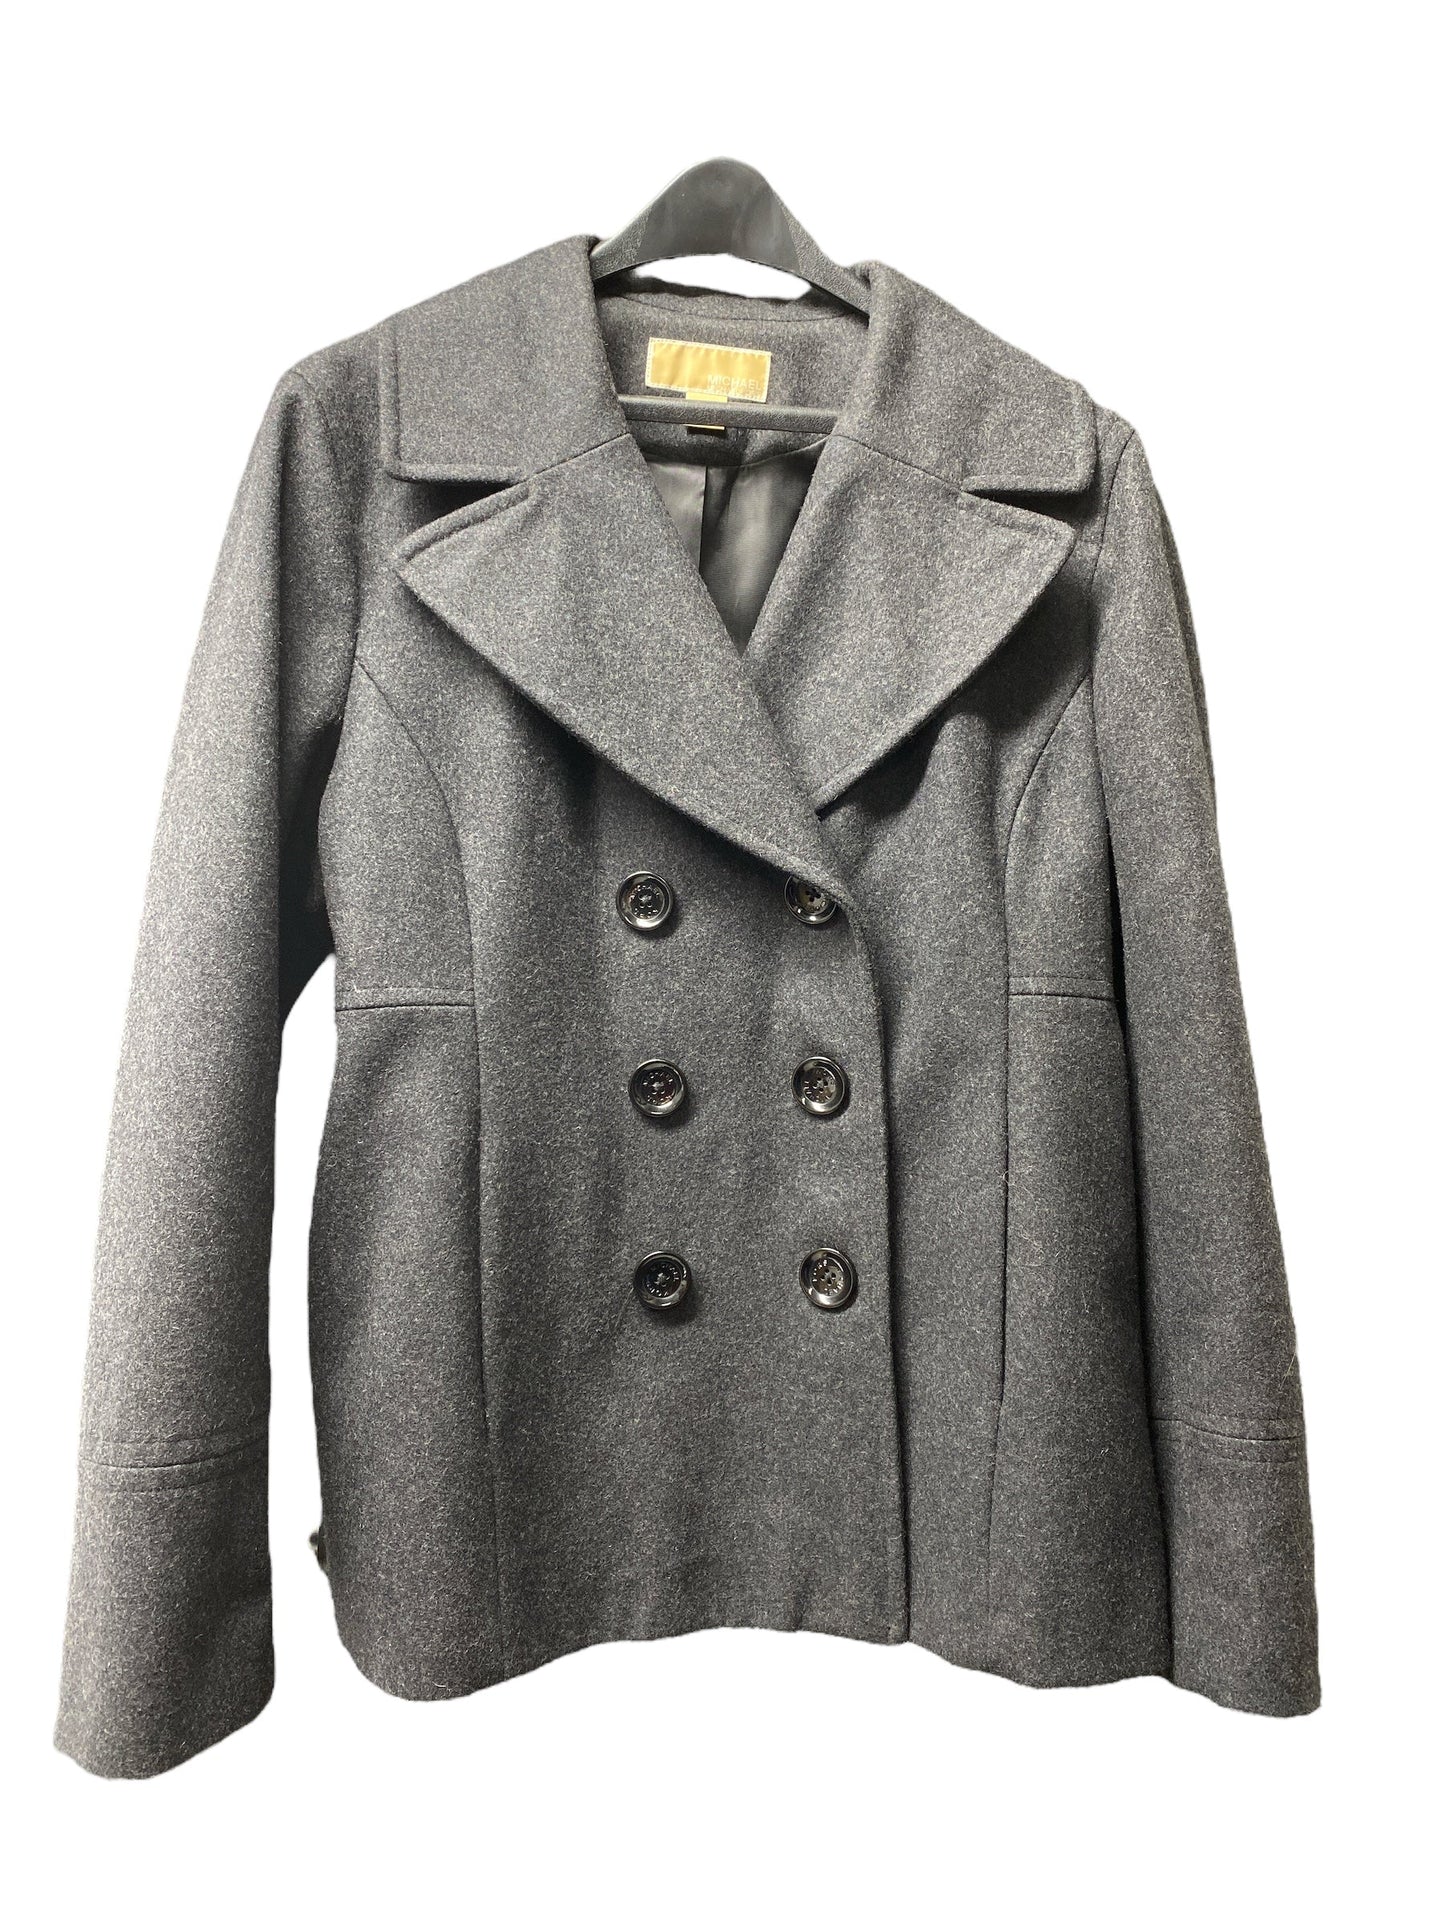 Coat Peacoat By Michael By Michael Kors  Size: Xl